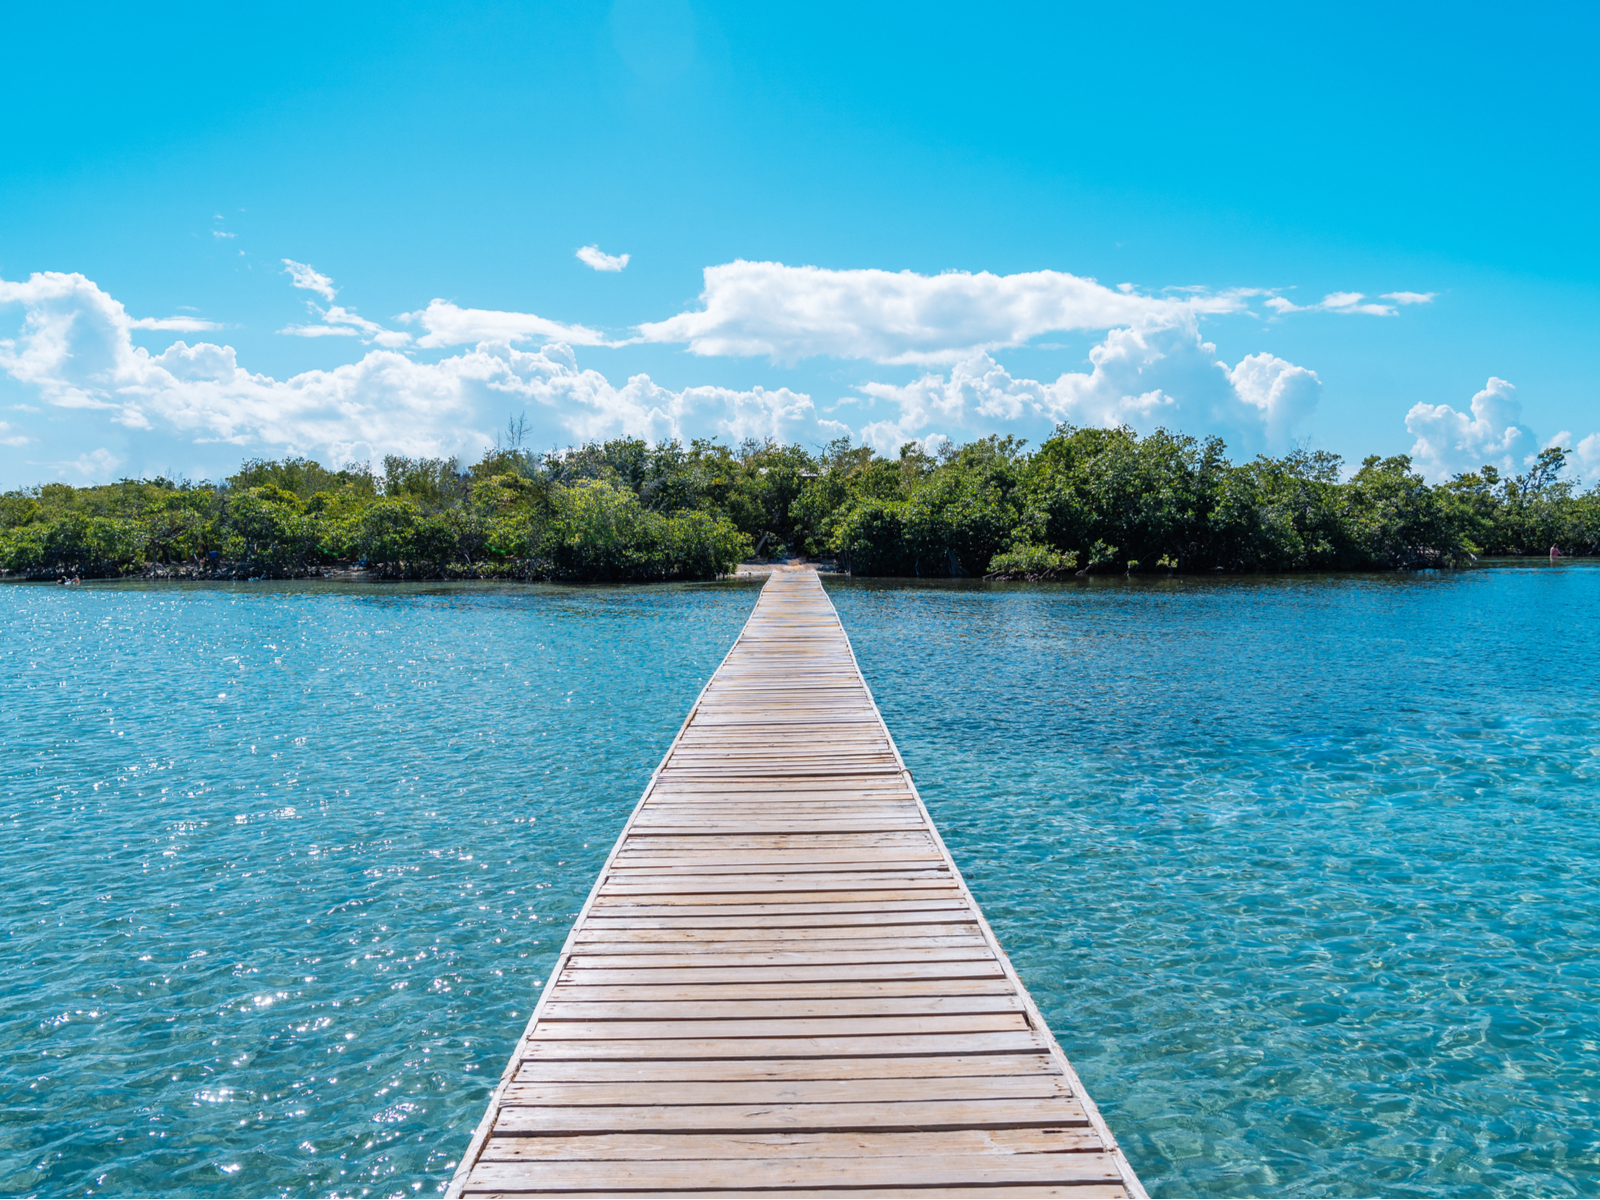 Strolling on an empty boardwalk, leading towards the rich Gilligan’s Island, is one of the must things to do in Puerto Rico